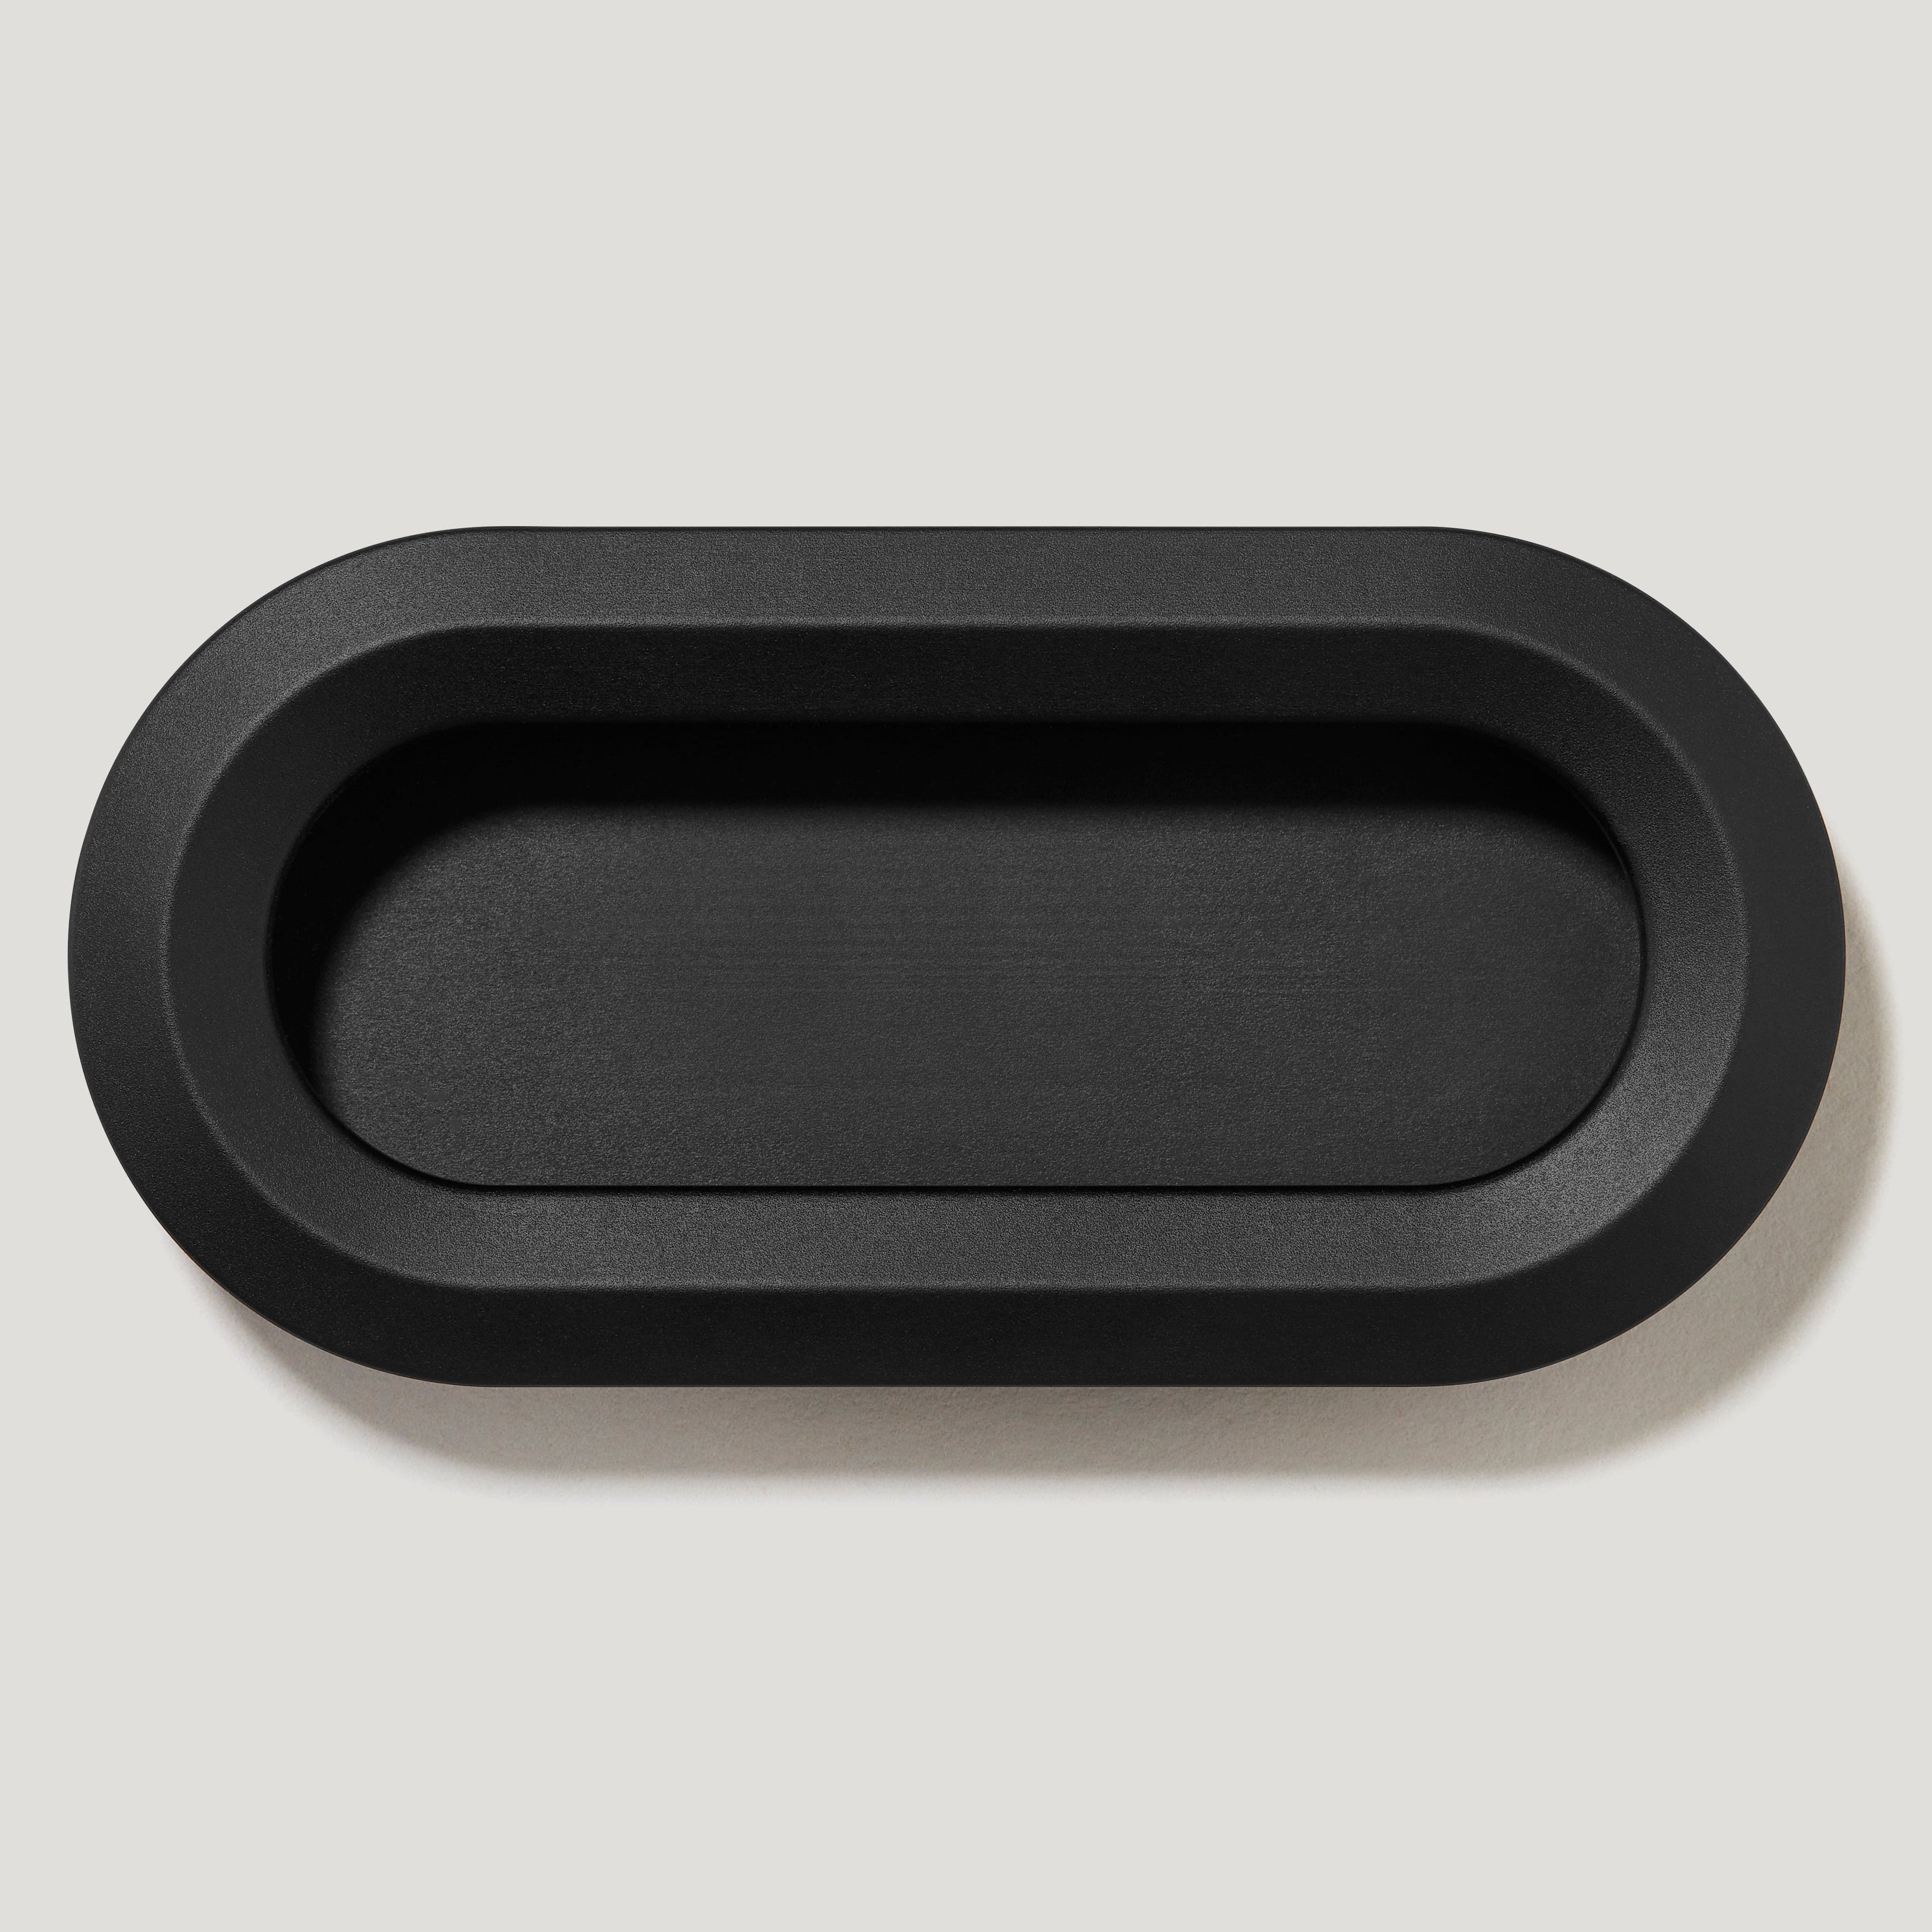 Plank Hardware OLMO Oval Recessed Pull Handle - Black